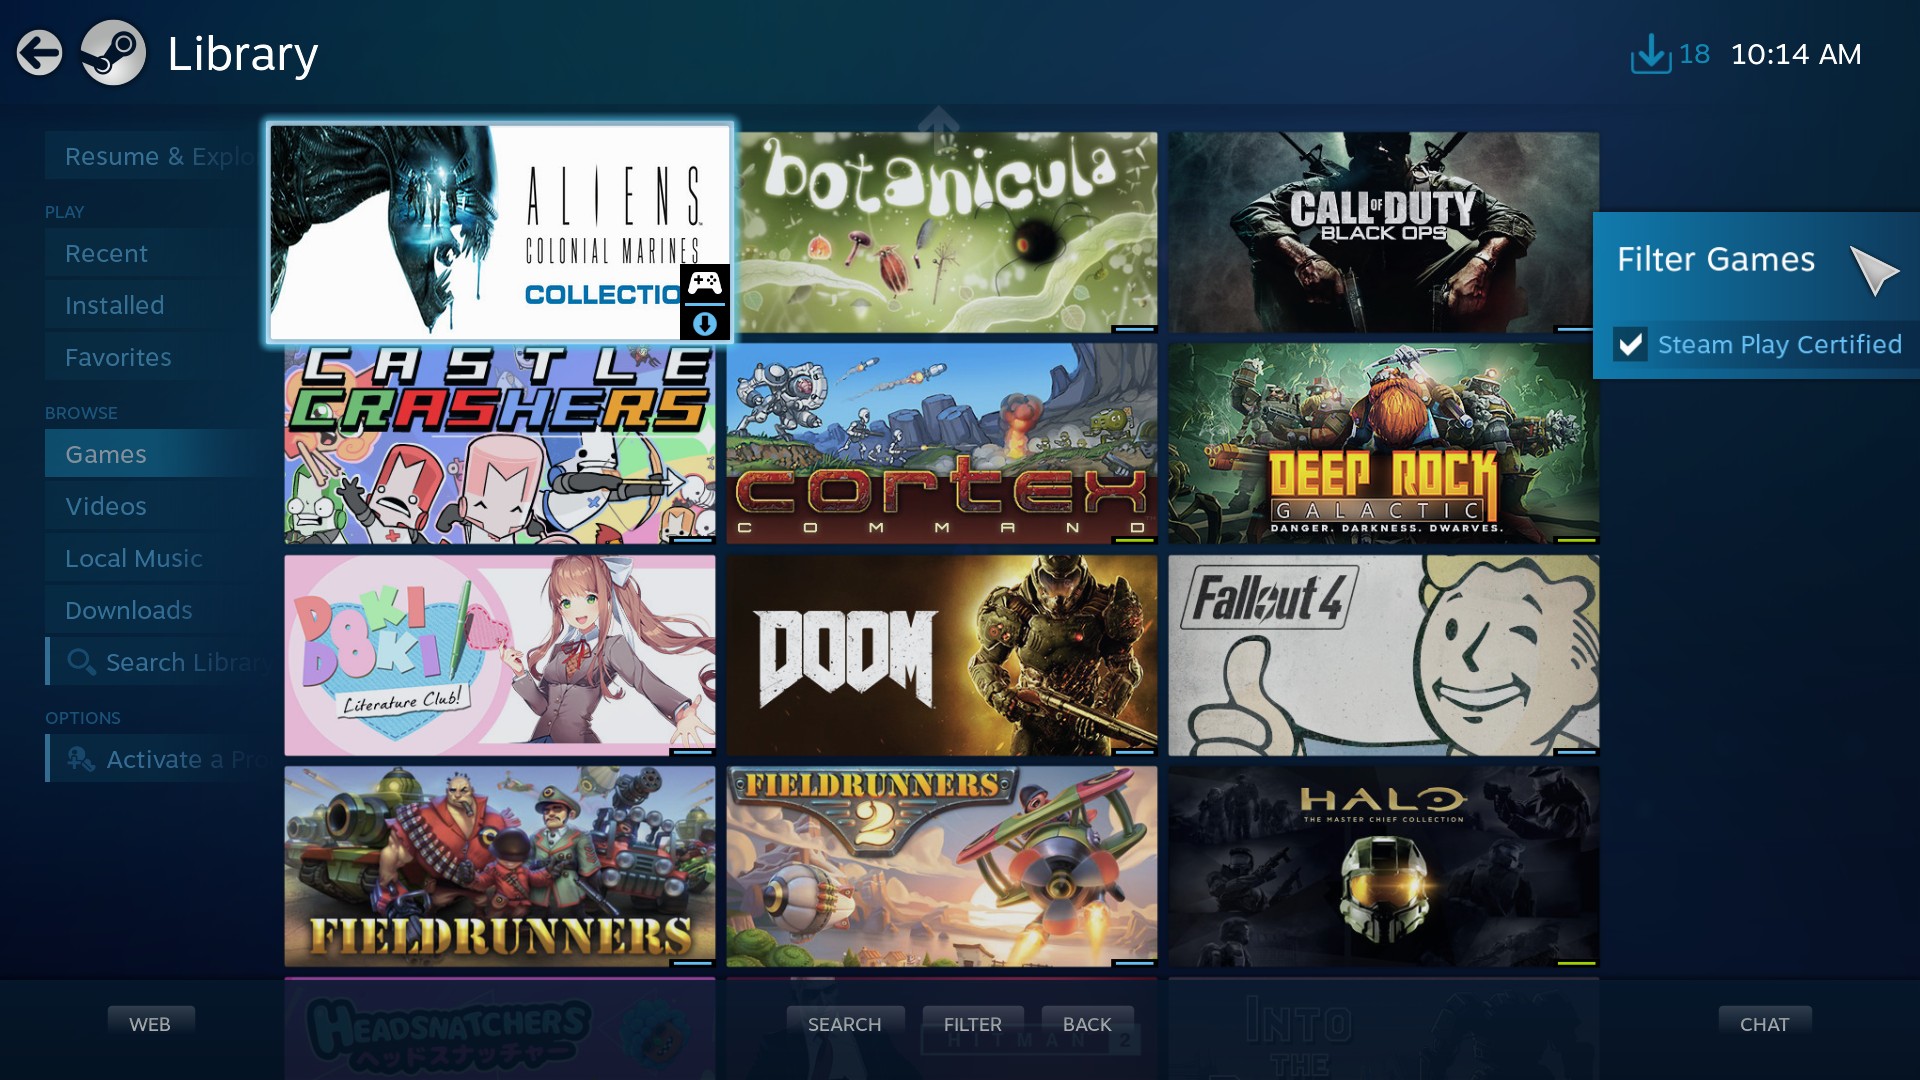 Valve Released A New Stable Version Of The Steam Client Steam Play Filter For Big Picture Mode Added Gamingonlinux